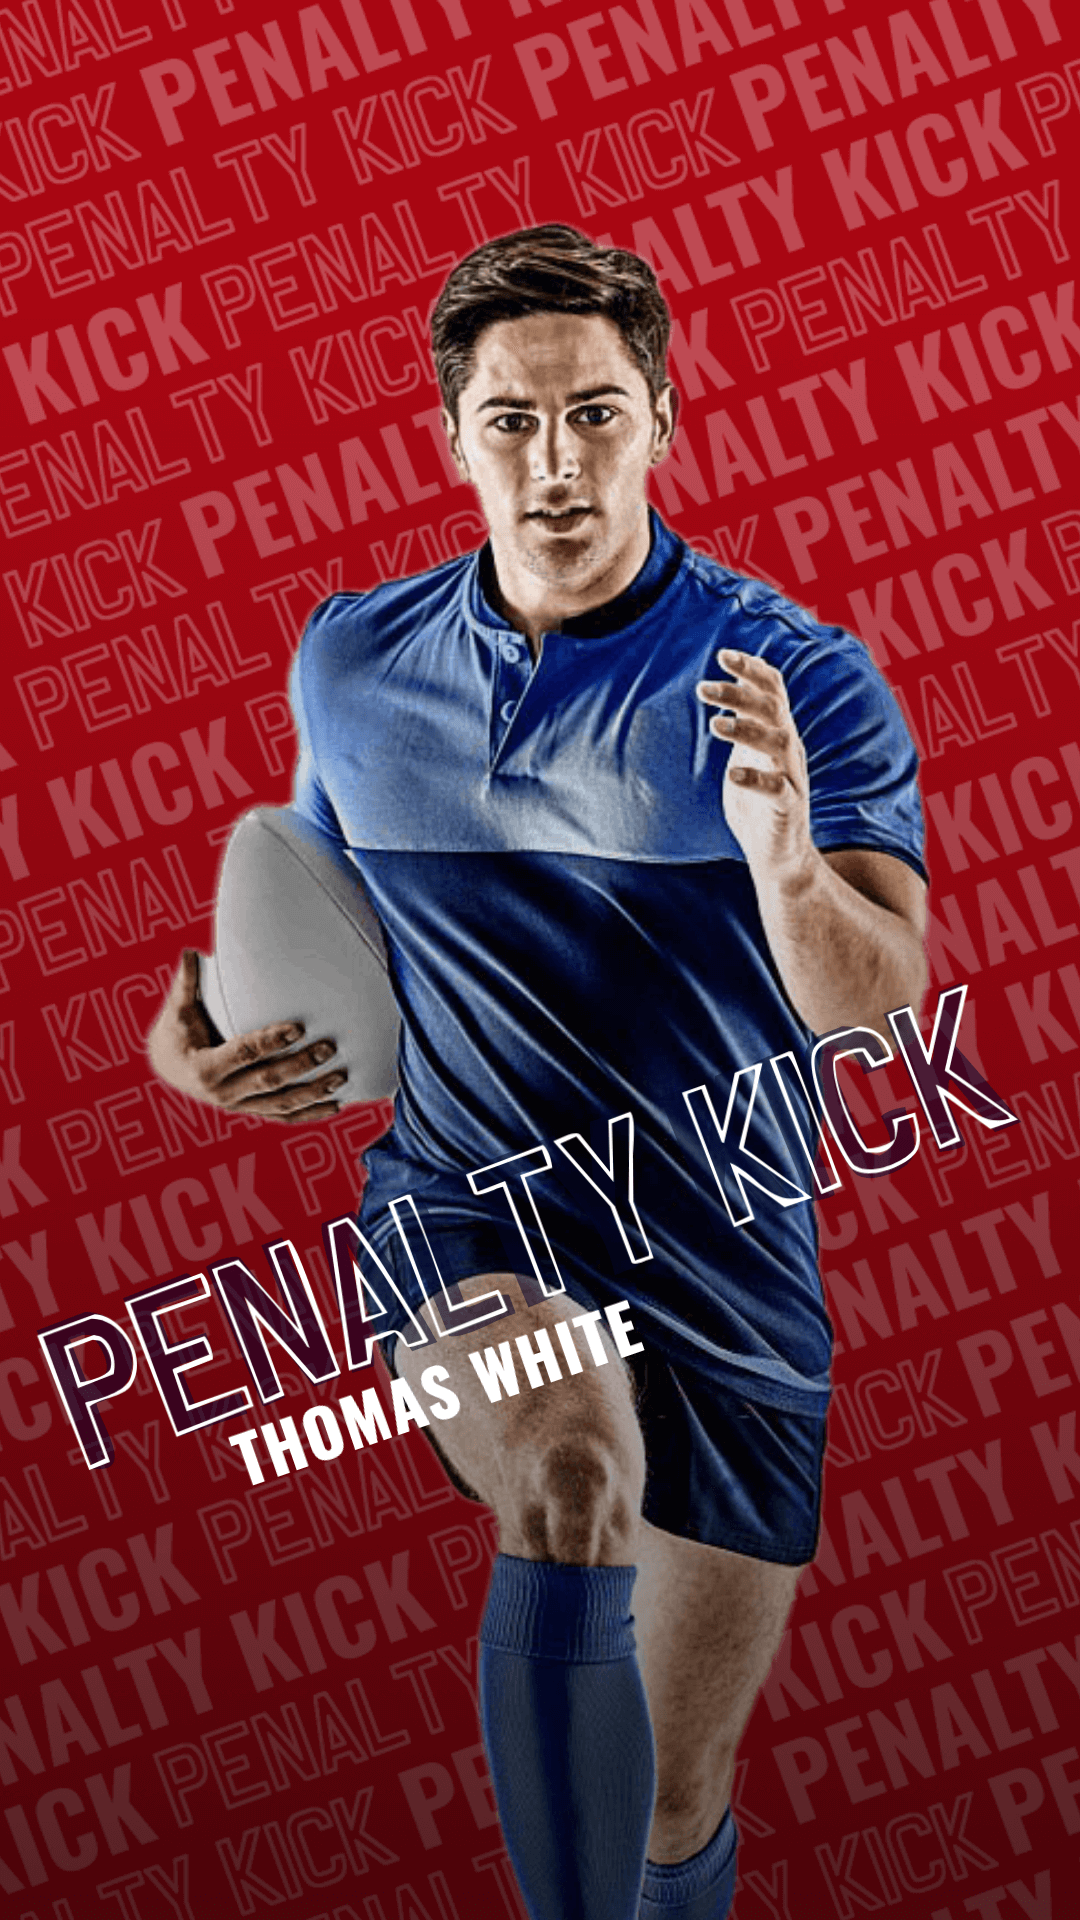 Rugby Penalty Kick Template